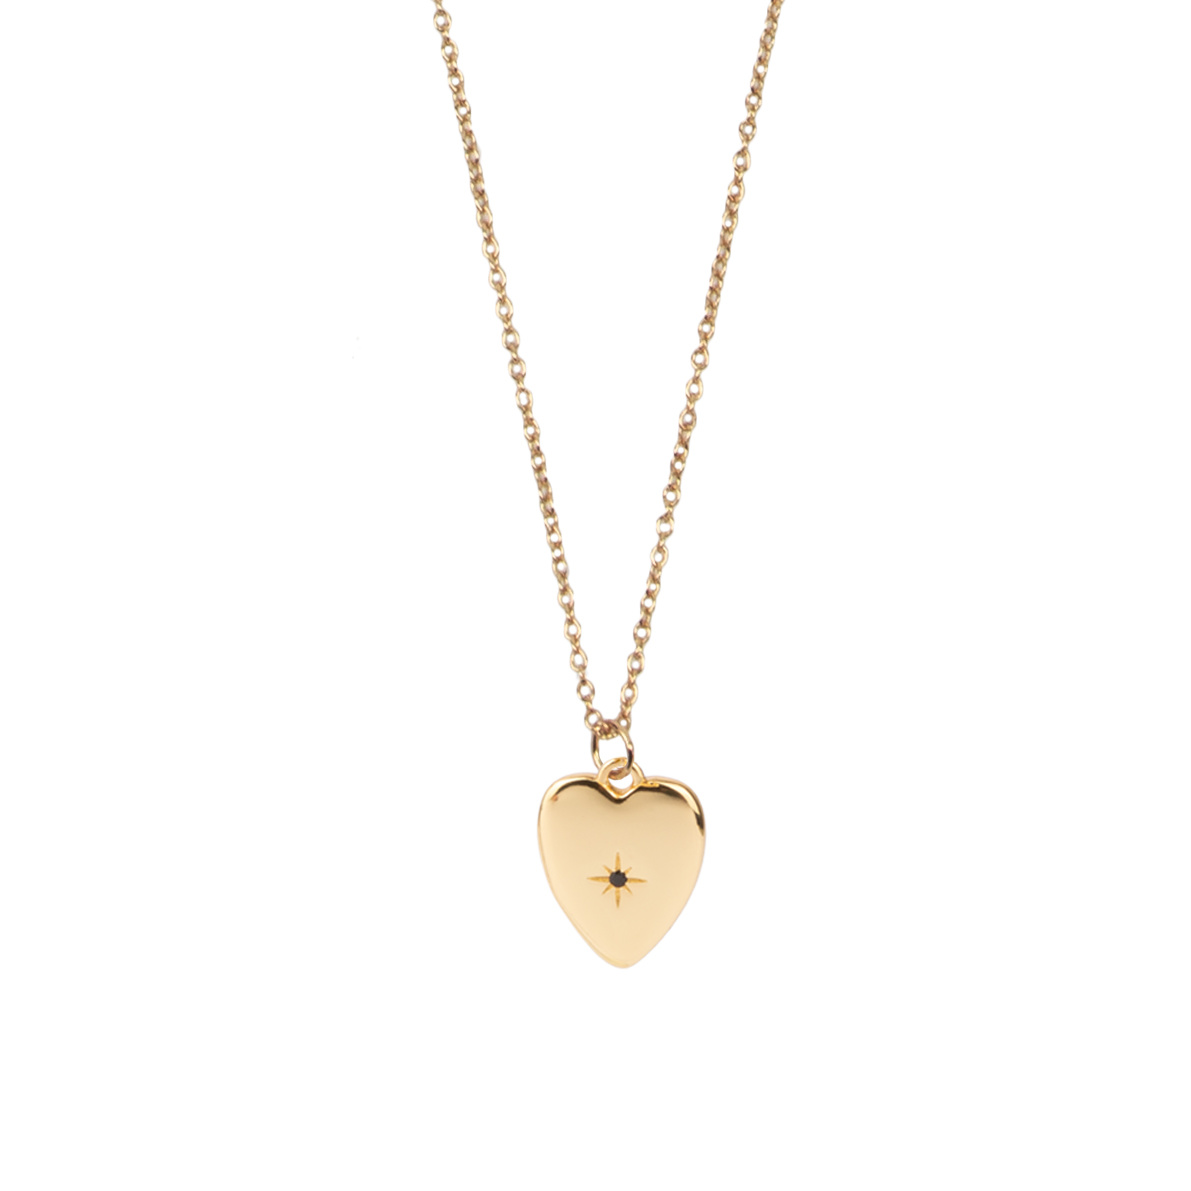 The Gift of the Heart: Heart Pendant Necklaces